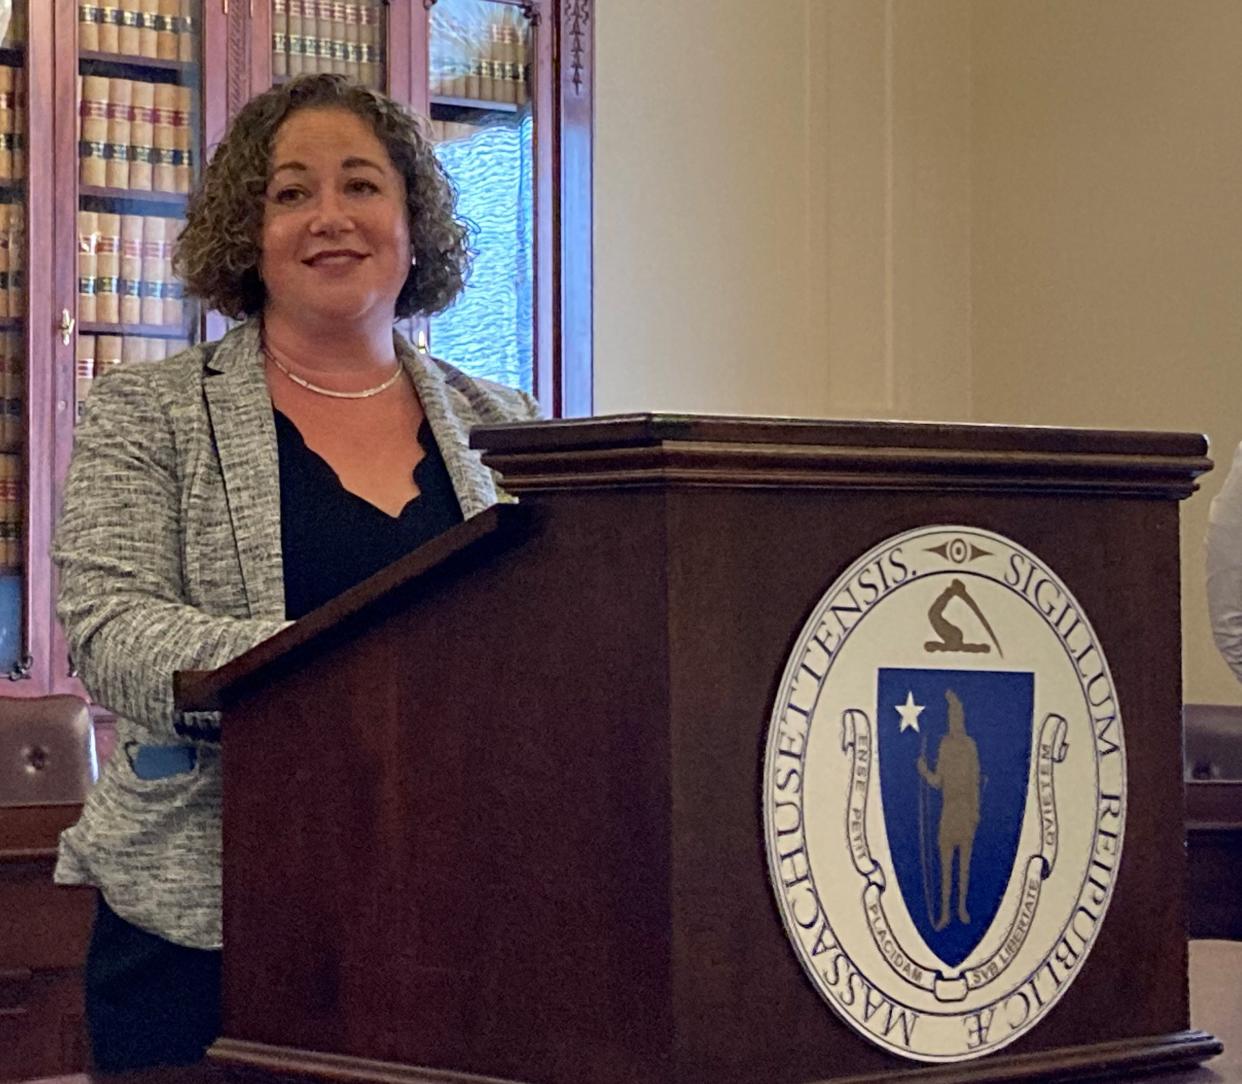 Co-chair of the Joint Committee on Environment and Natural Resources, Sen. Becca Rausch, D-Needham, speaks Wednesday at a forum where as advocates urged lawmakers to favor measures that would require testing of private wells, especially at real estate transfers.